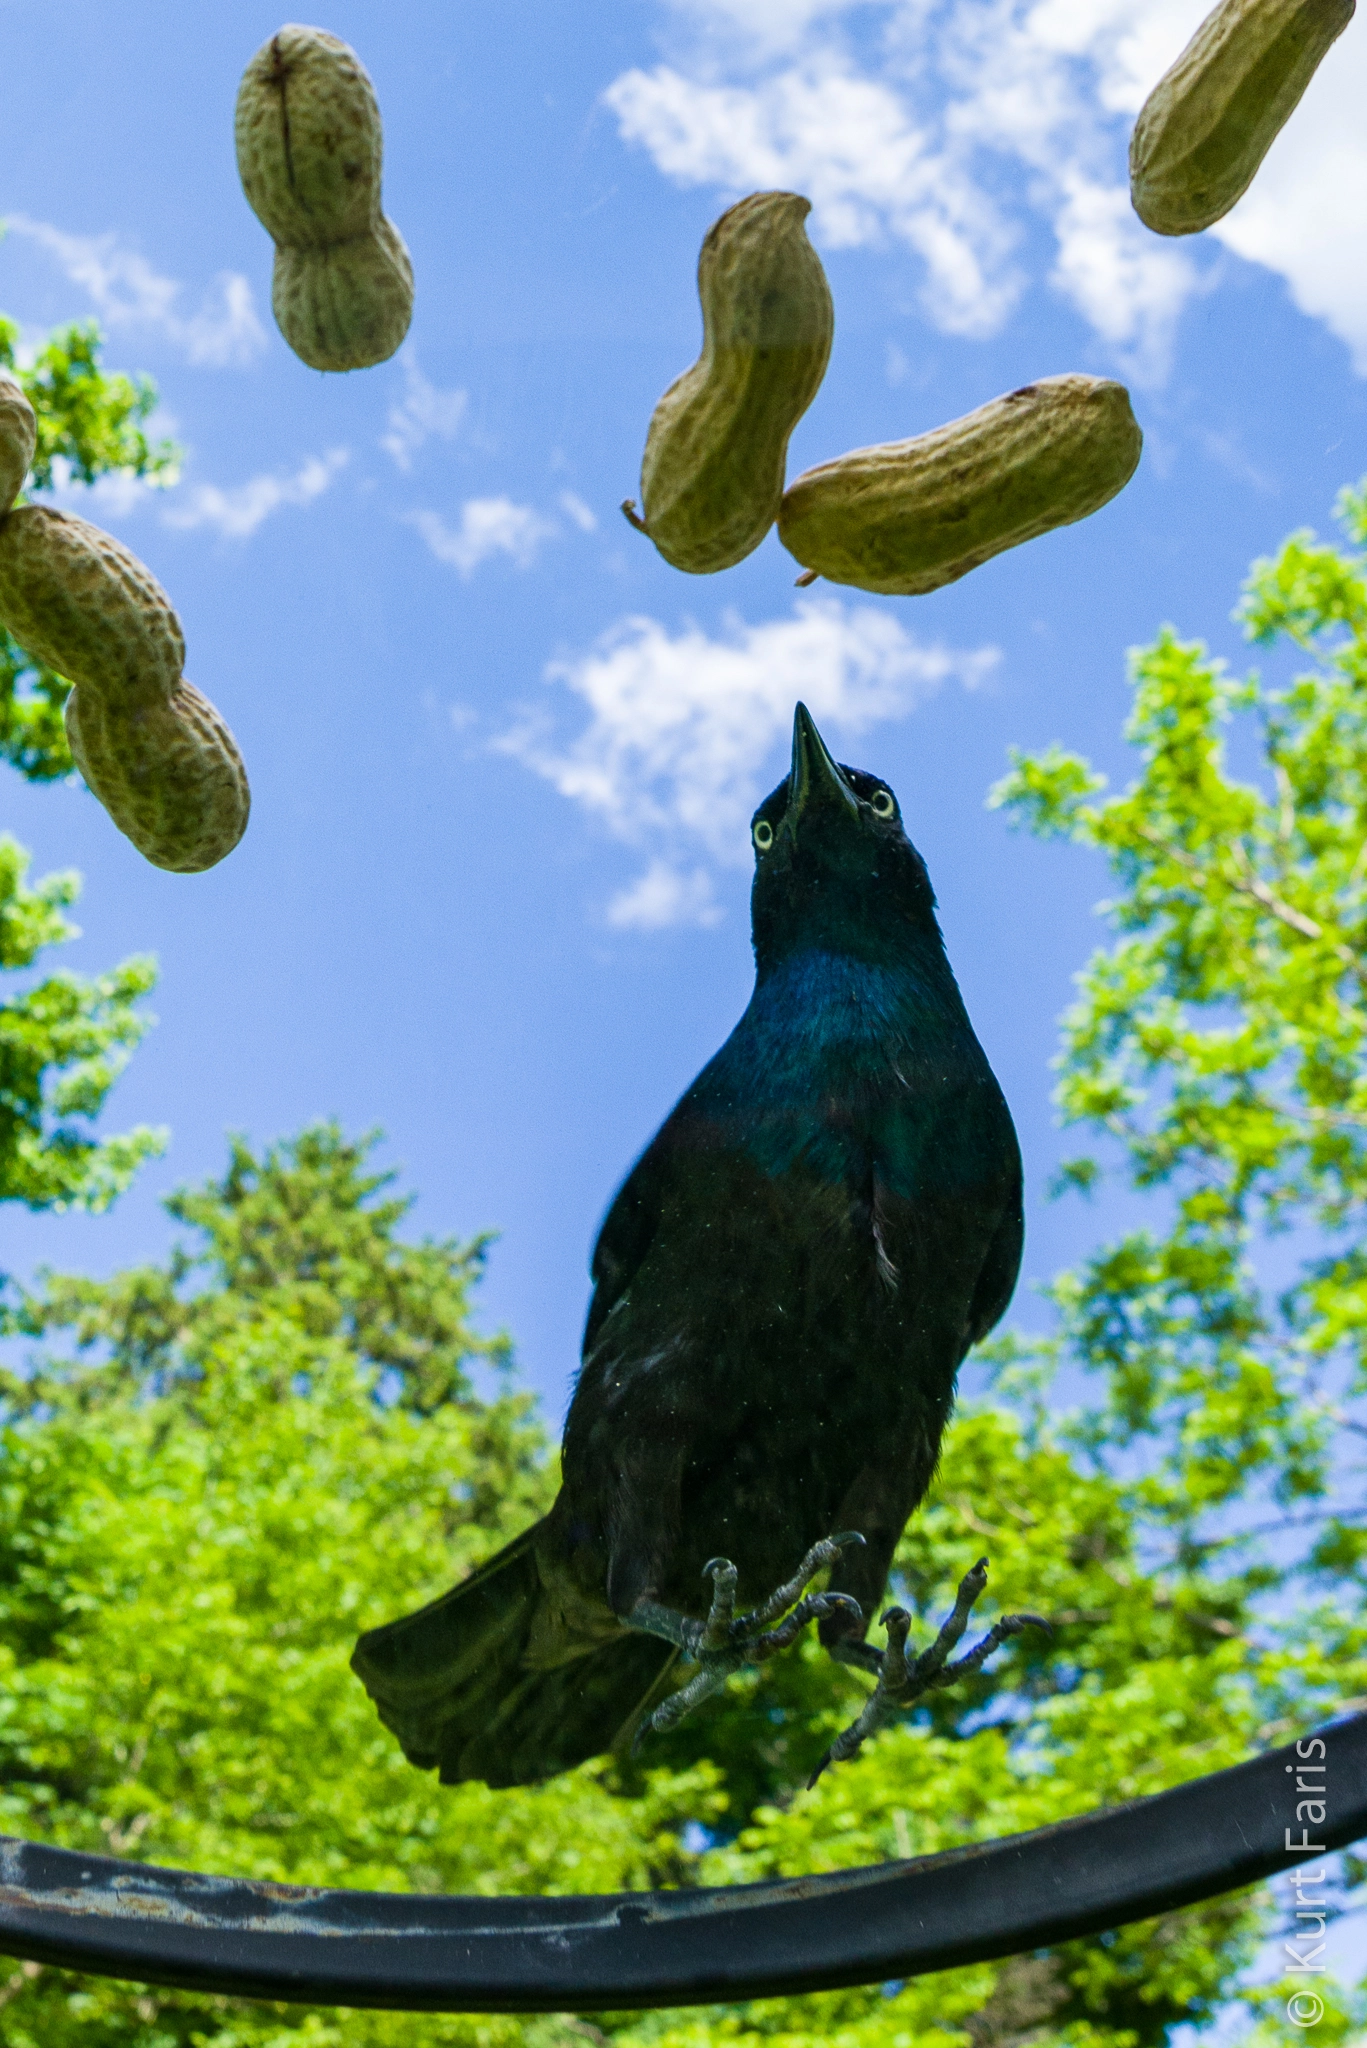 Nikon D800 sample photo. A different perspective on the common grackle. photography